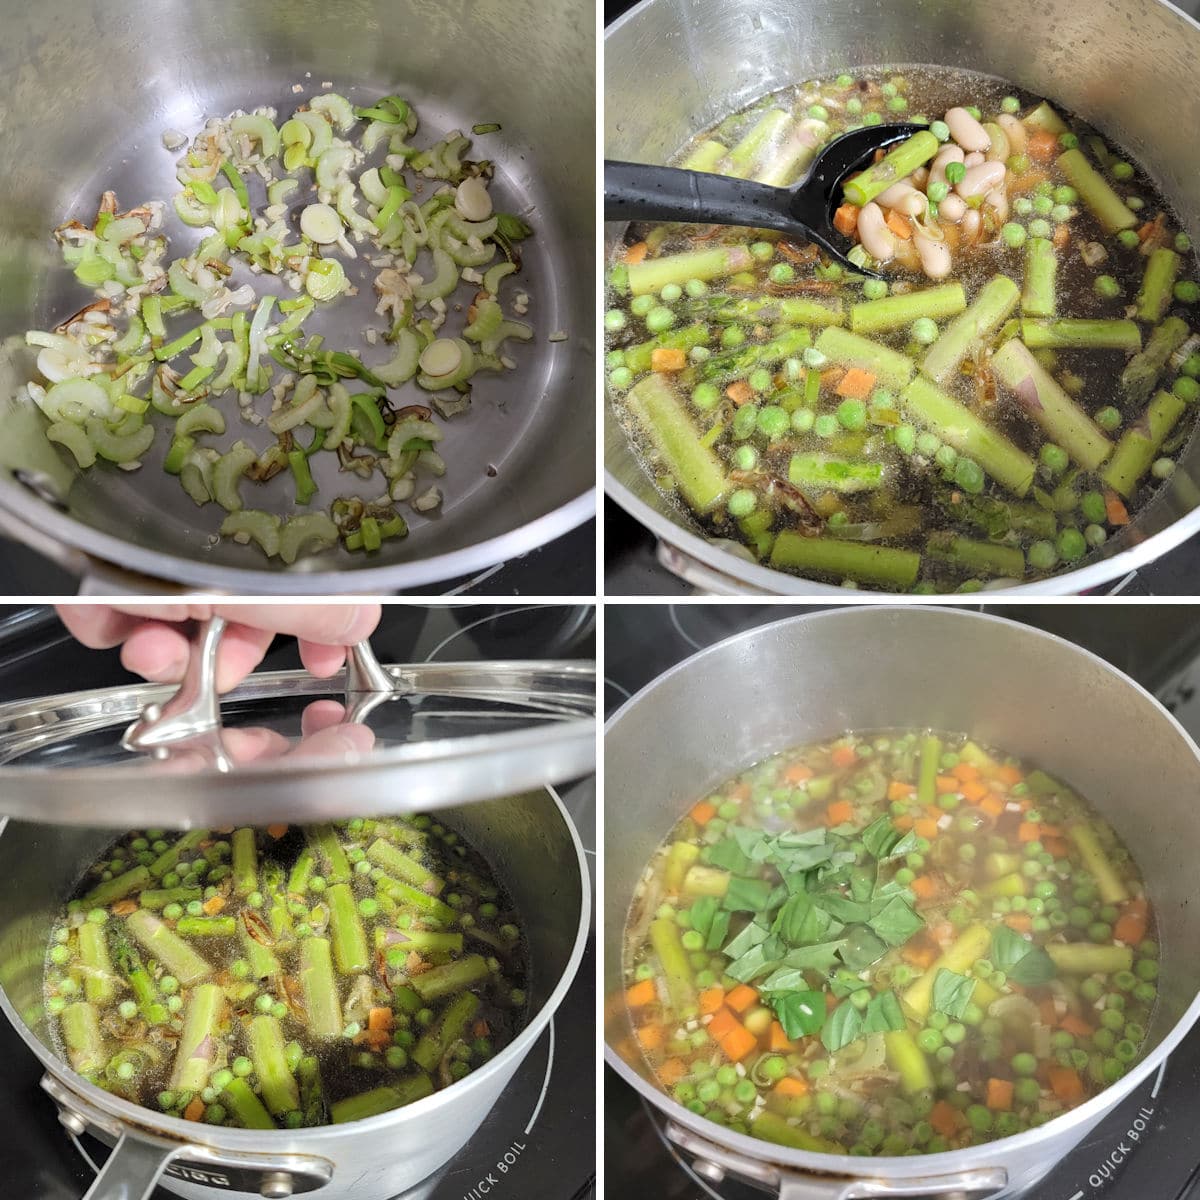 Collage showing process of cooking vegetable soup in a metal pot.